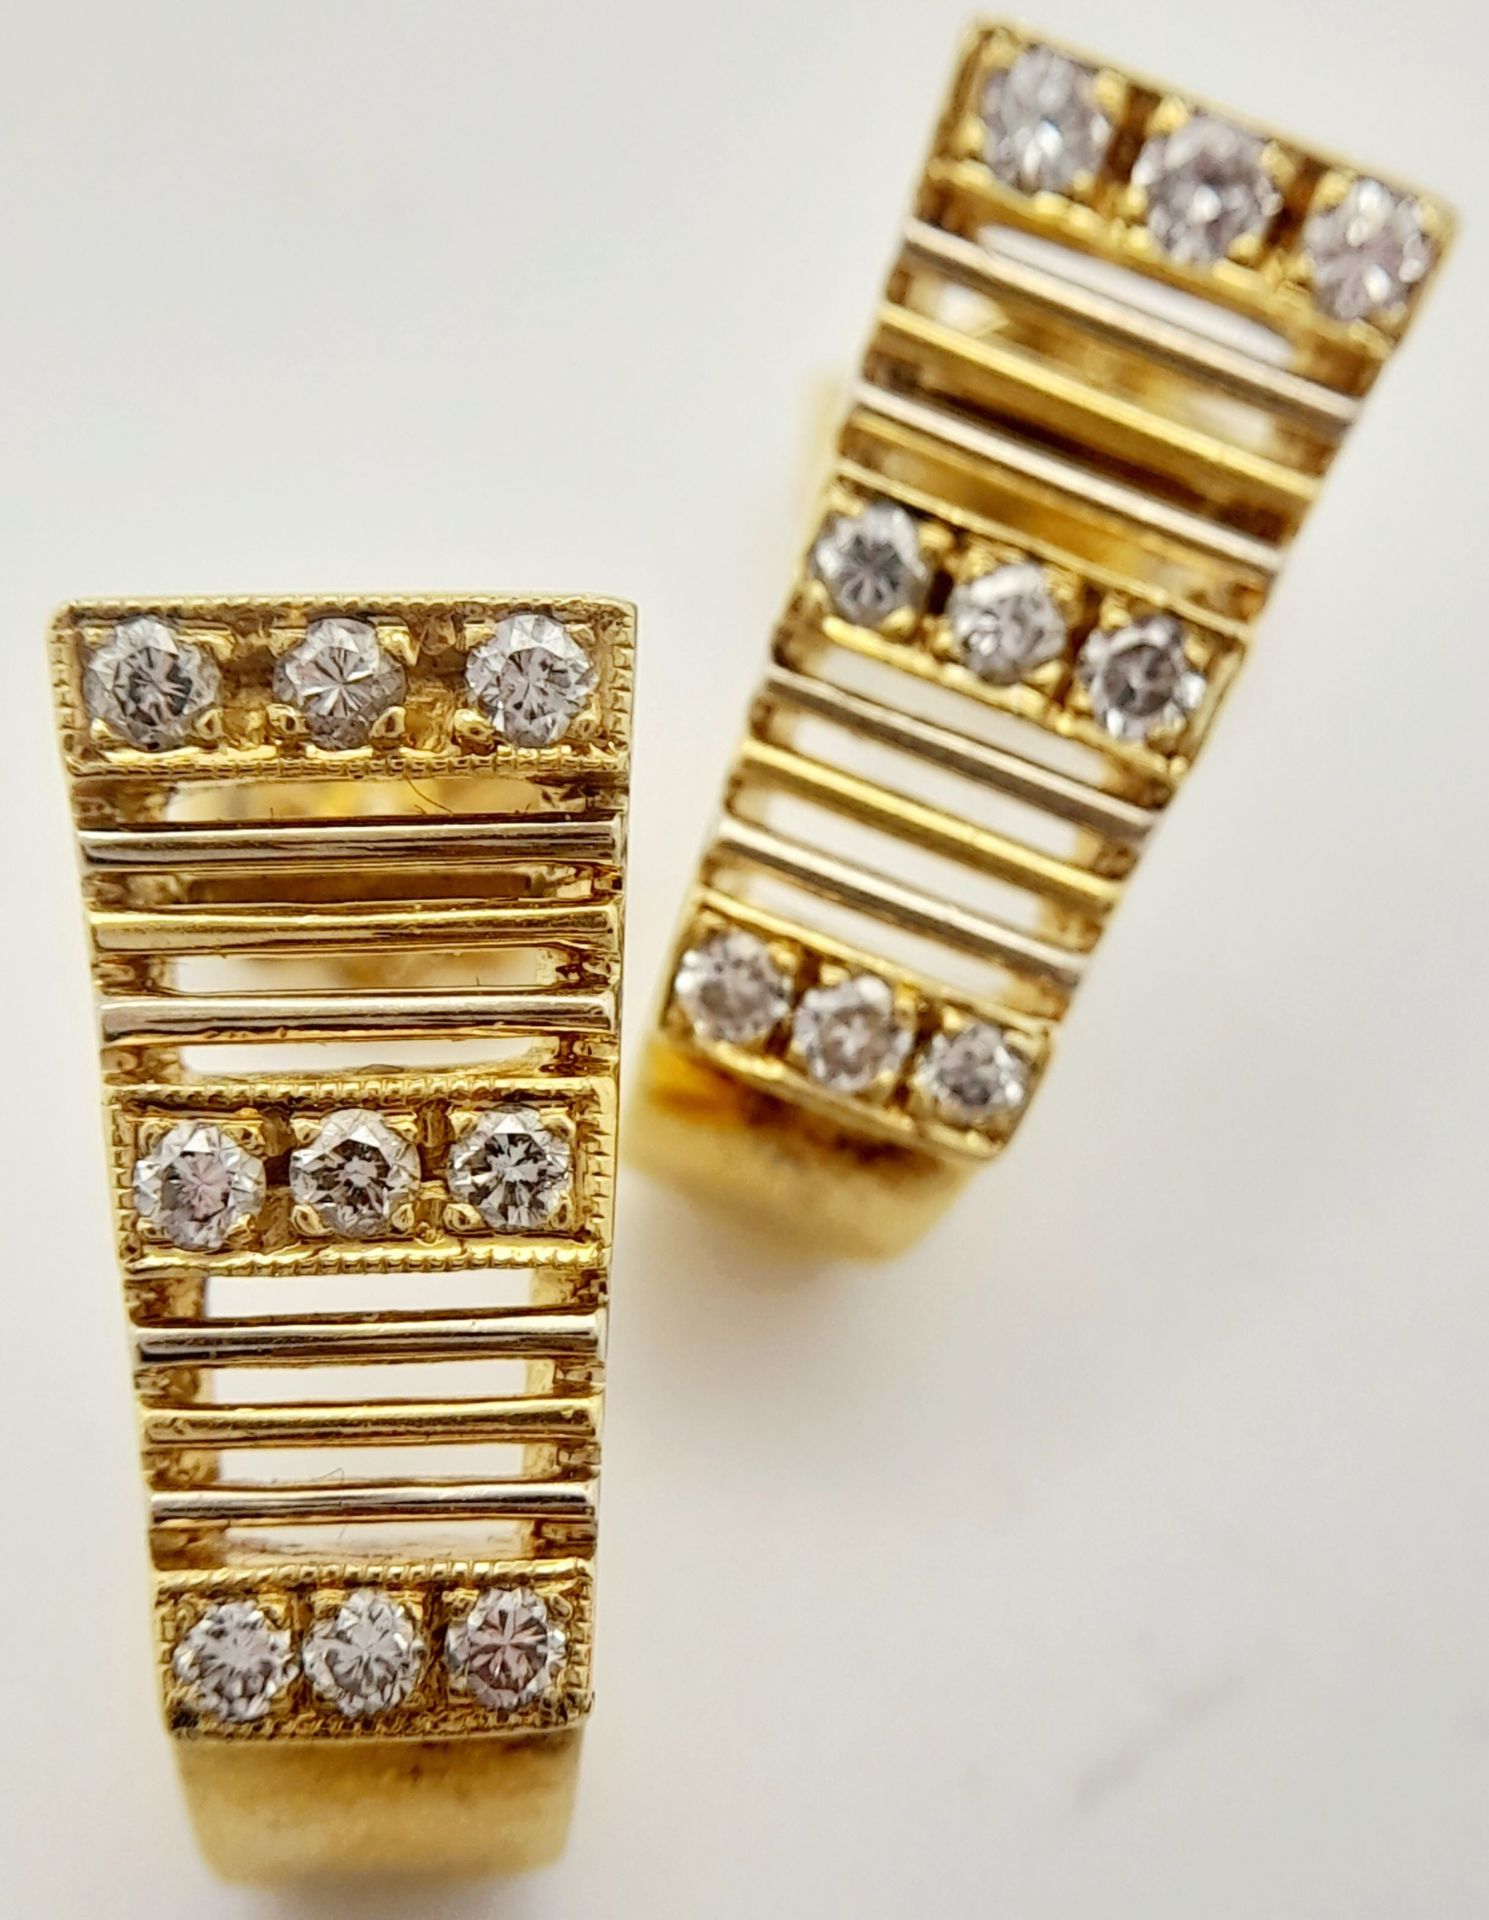 A PAIR OF 14K YELLOW GOLD DIAMOND SET EARRINGS. 0.20ctw, 1.7cm length, 4.7g total weight. Ref: SC